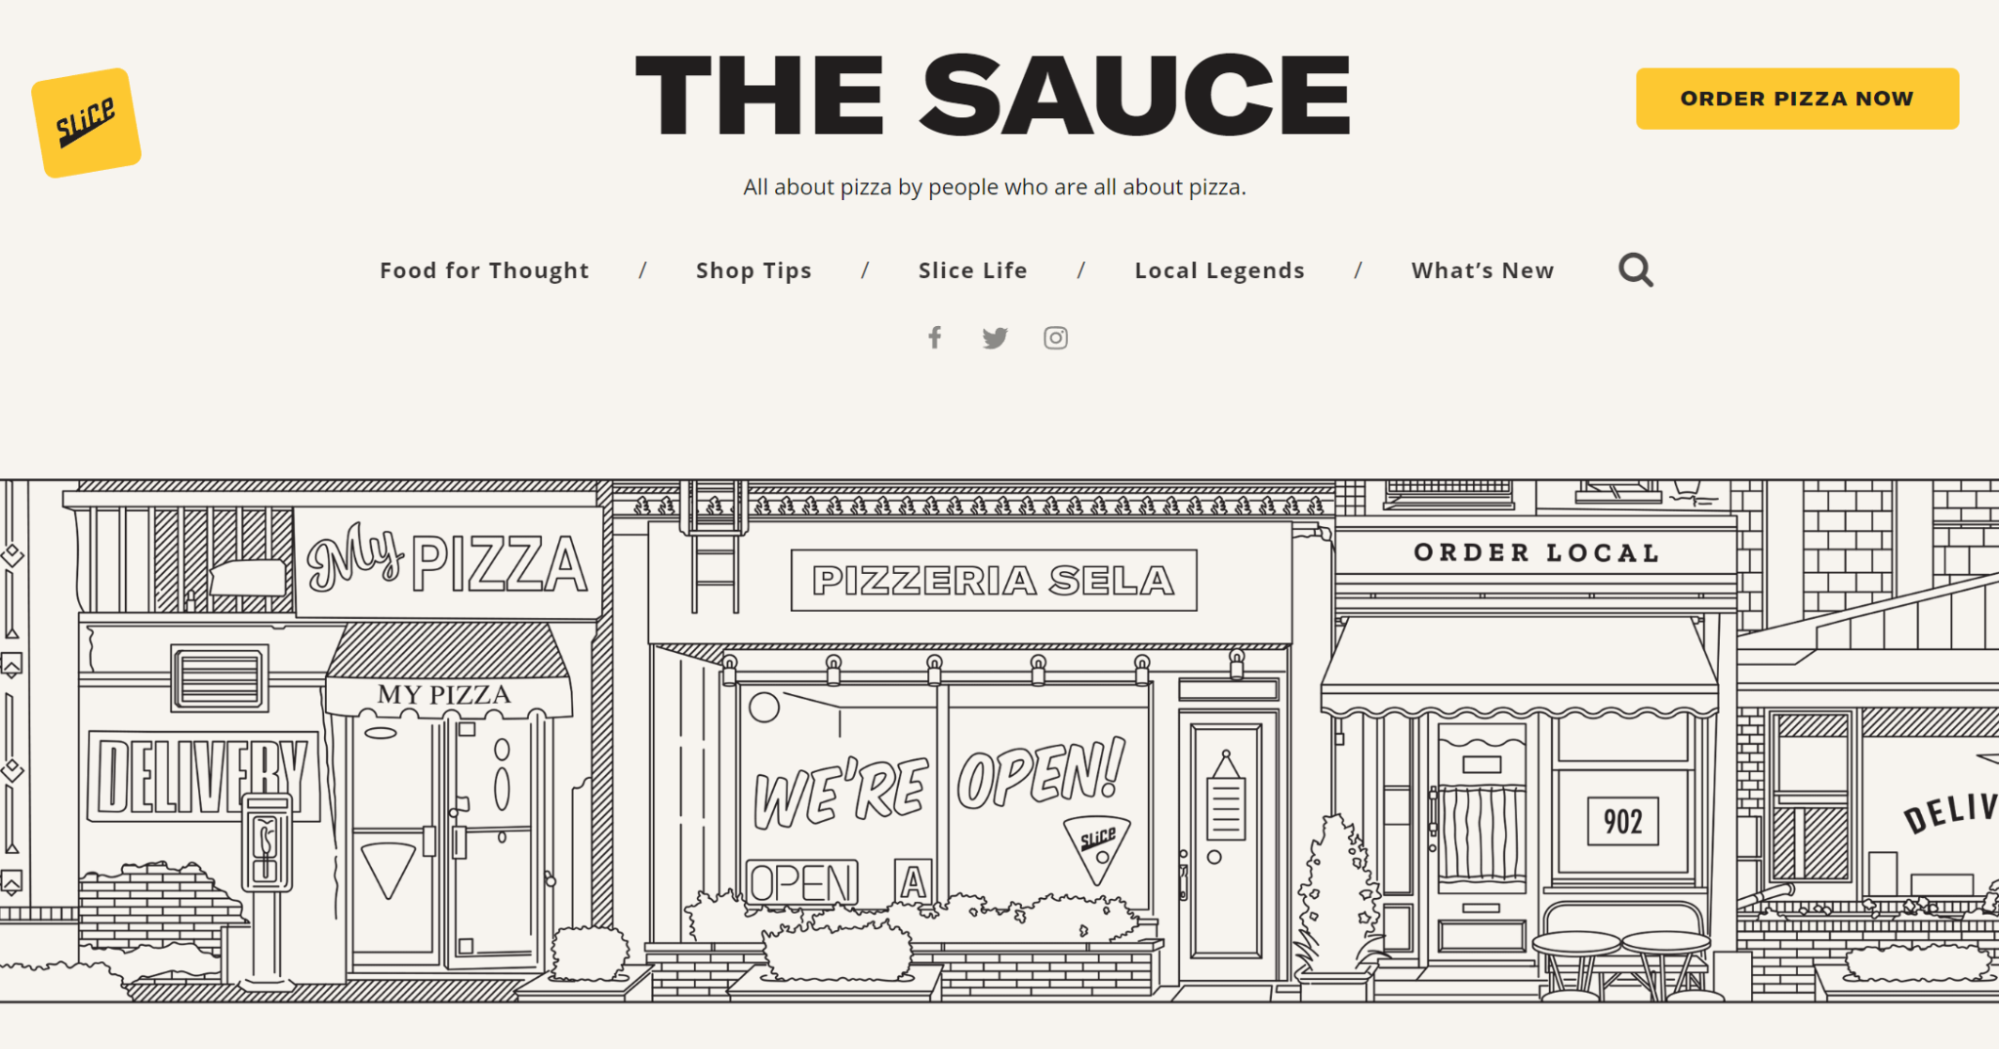 The Sauce is Slice's blog for all things pizza